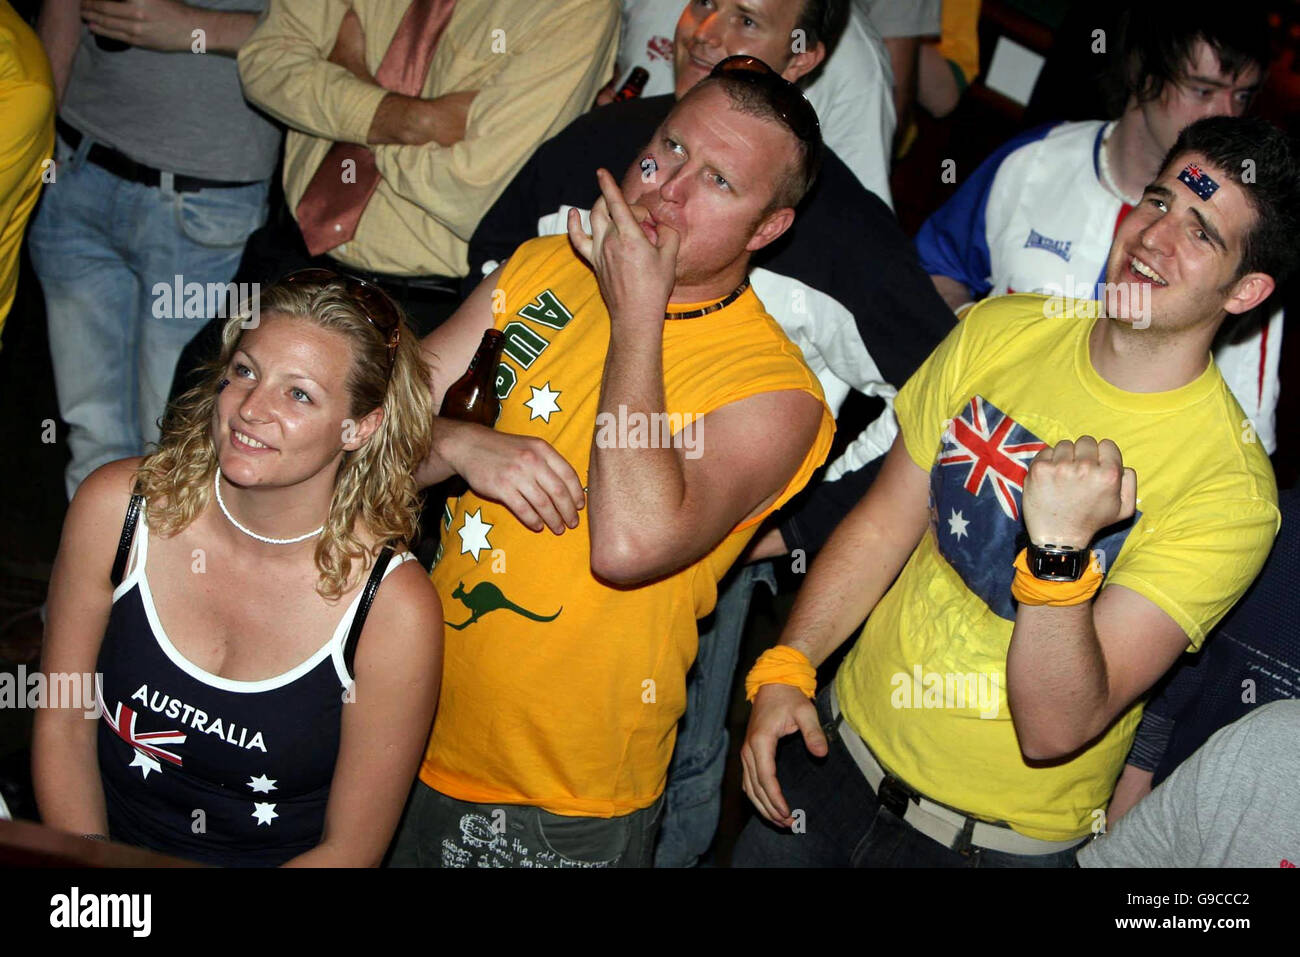 Austrailian fans cheer on their team against Japan at the Whool Shed Pub in Dublin. Stock Photo